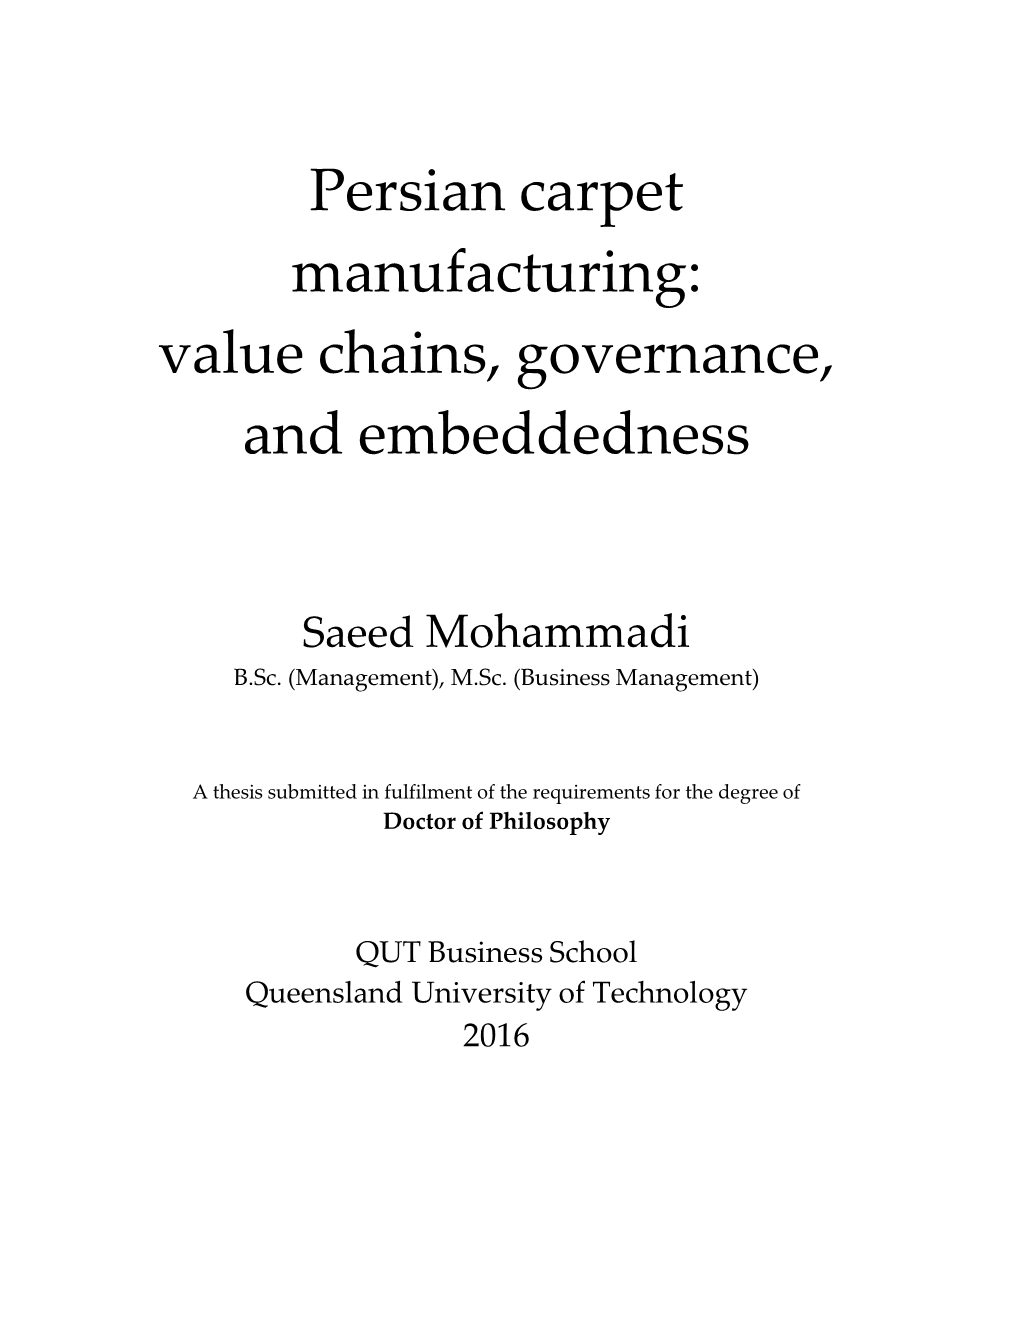 Persian Carpet Manufacturing: Value Chains, Governance, and Embeddedness